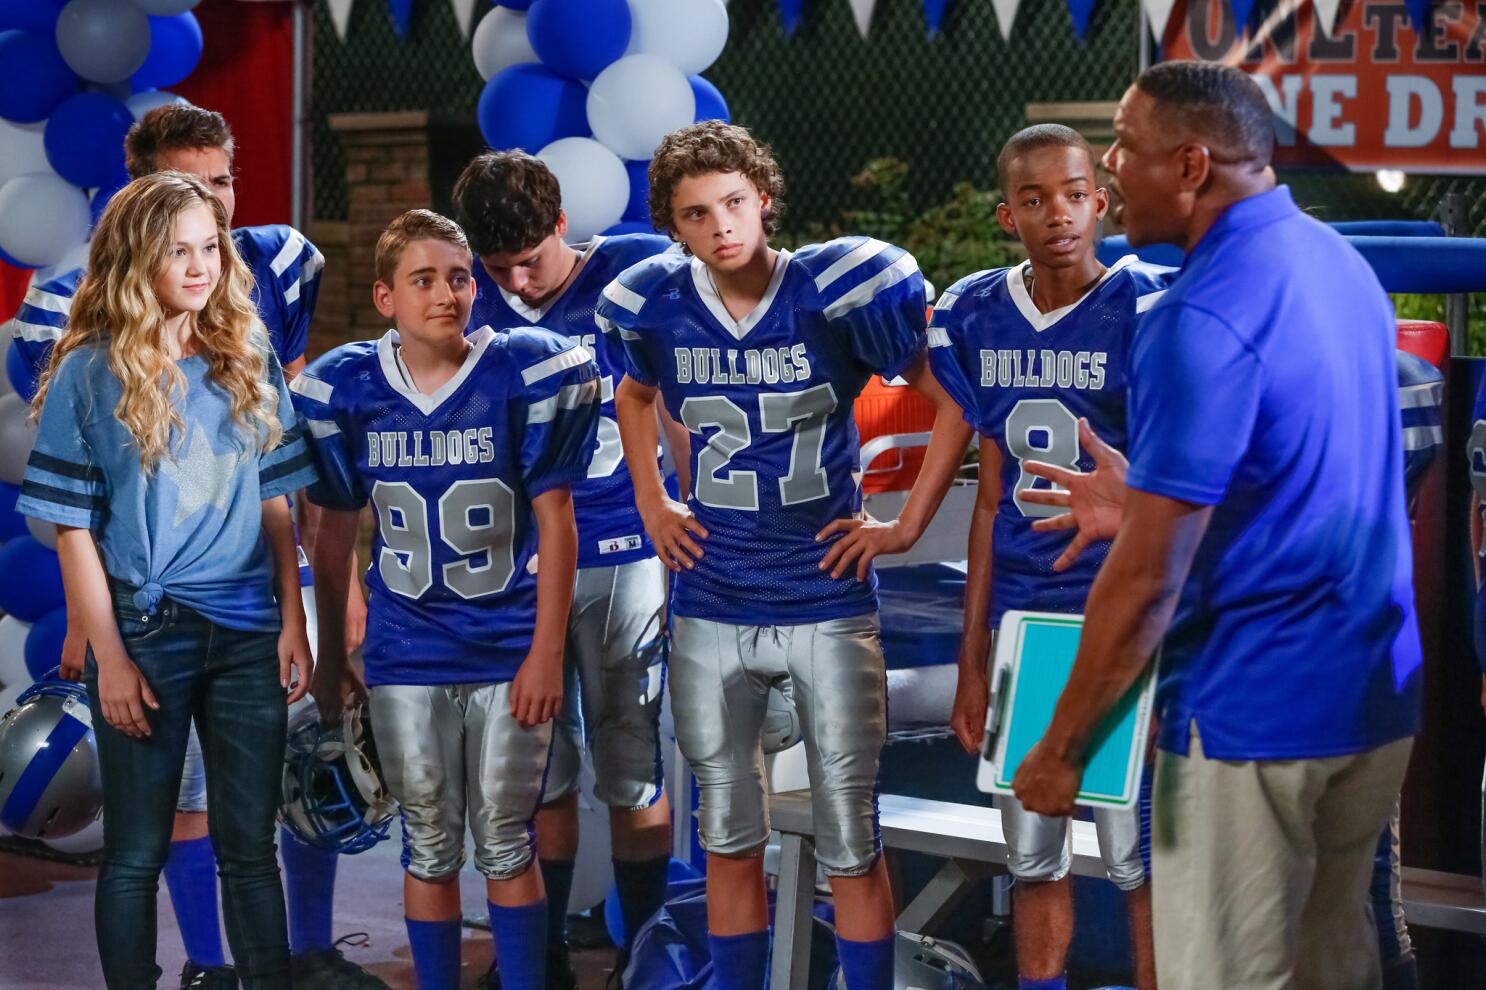 Review: The fine 'Bella and the Bulldogs' mixes football, gender